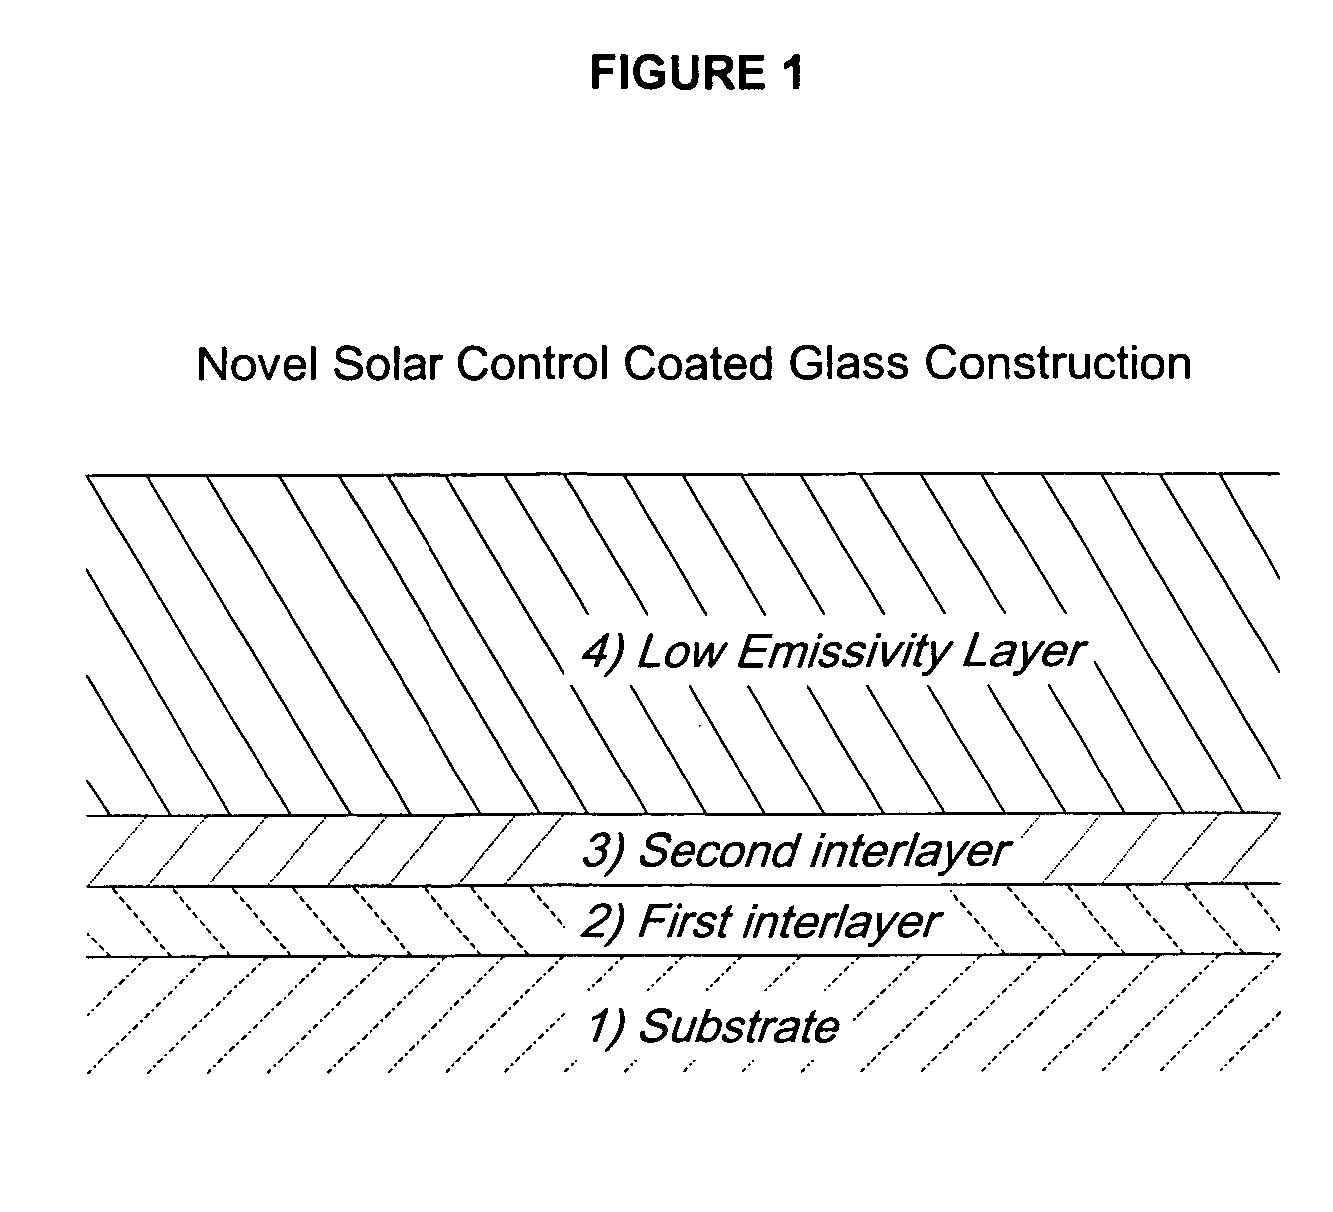 Solar control coated glass composition